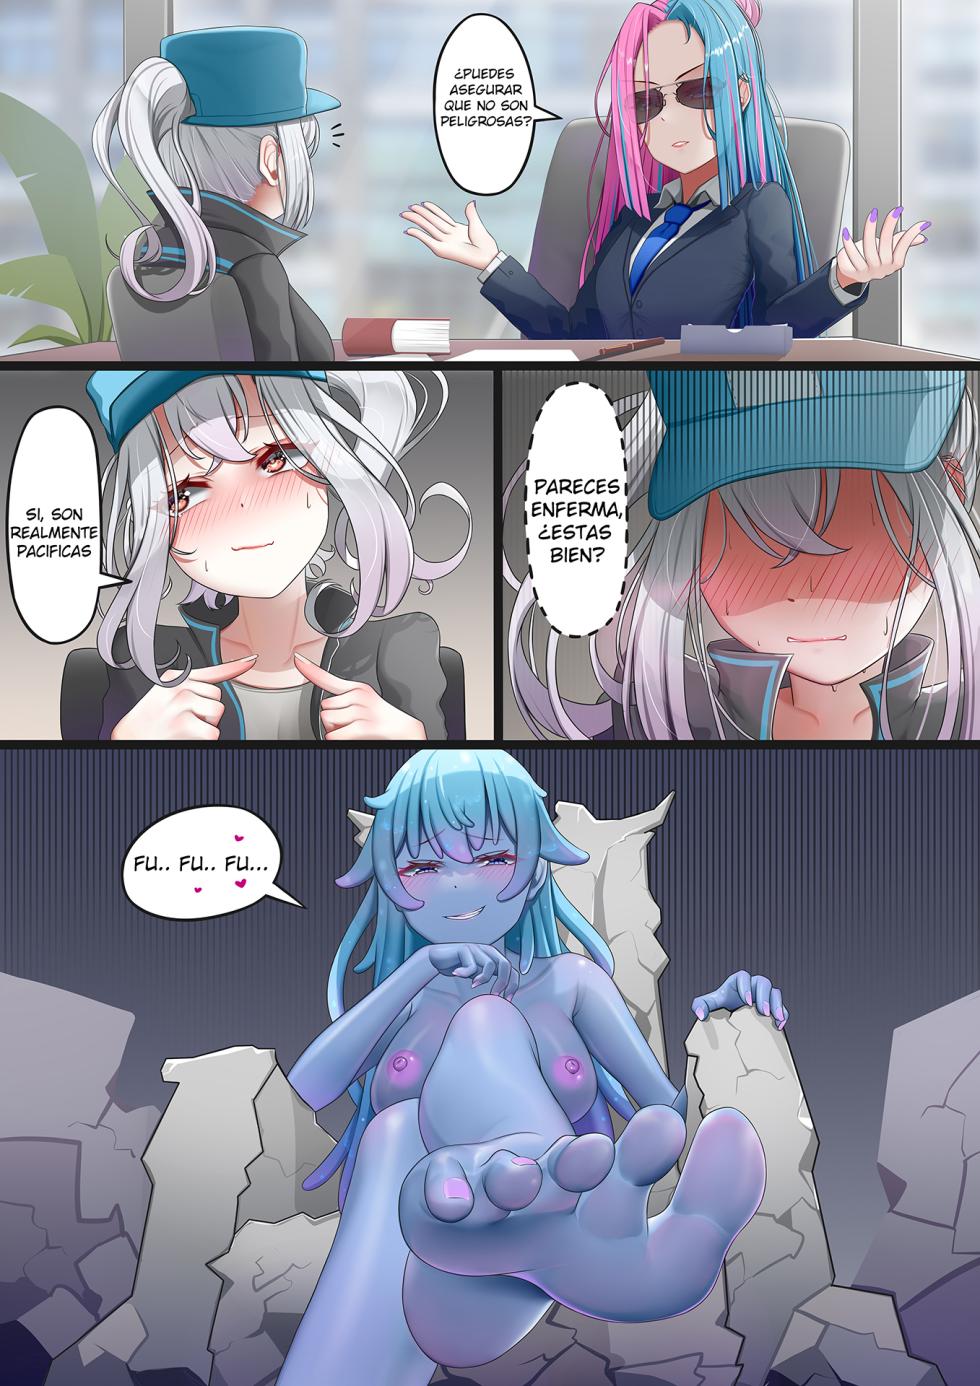 Ero Matcha ? - Remains of the Slime Realm Comic by Atomb [English, Spanish] - Page 2